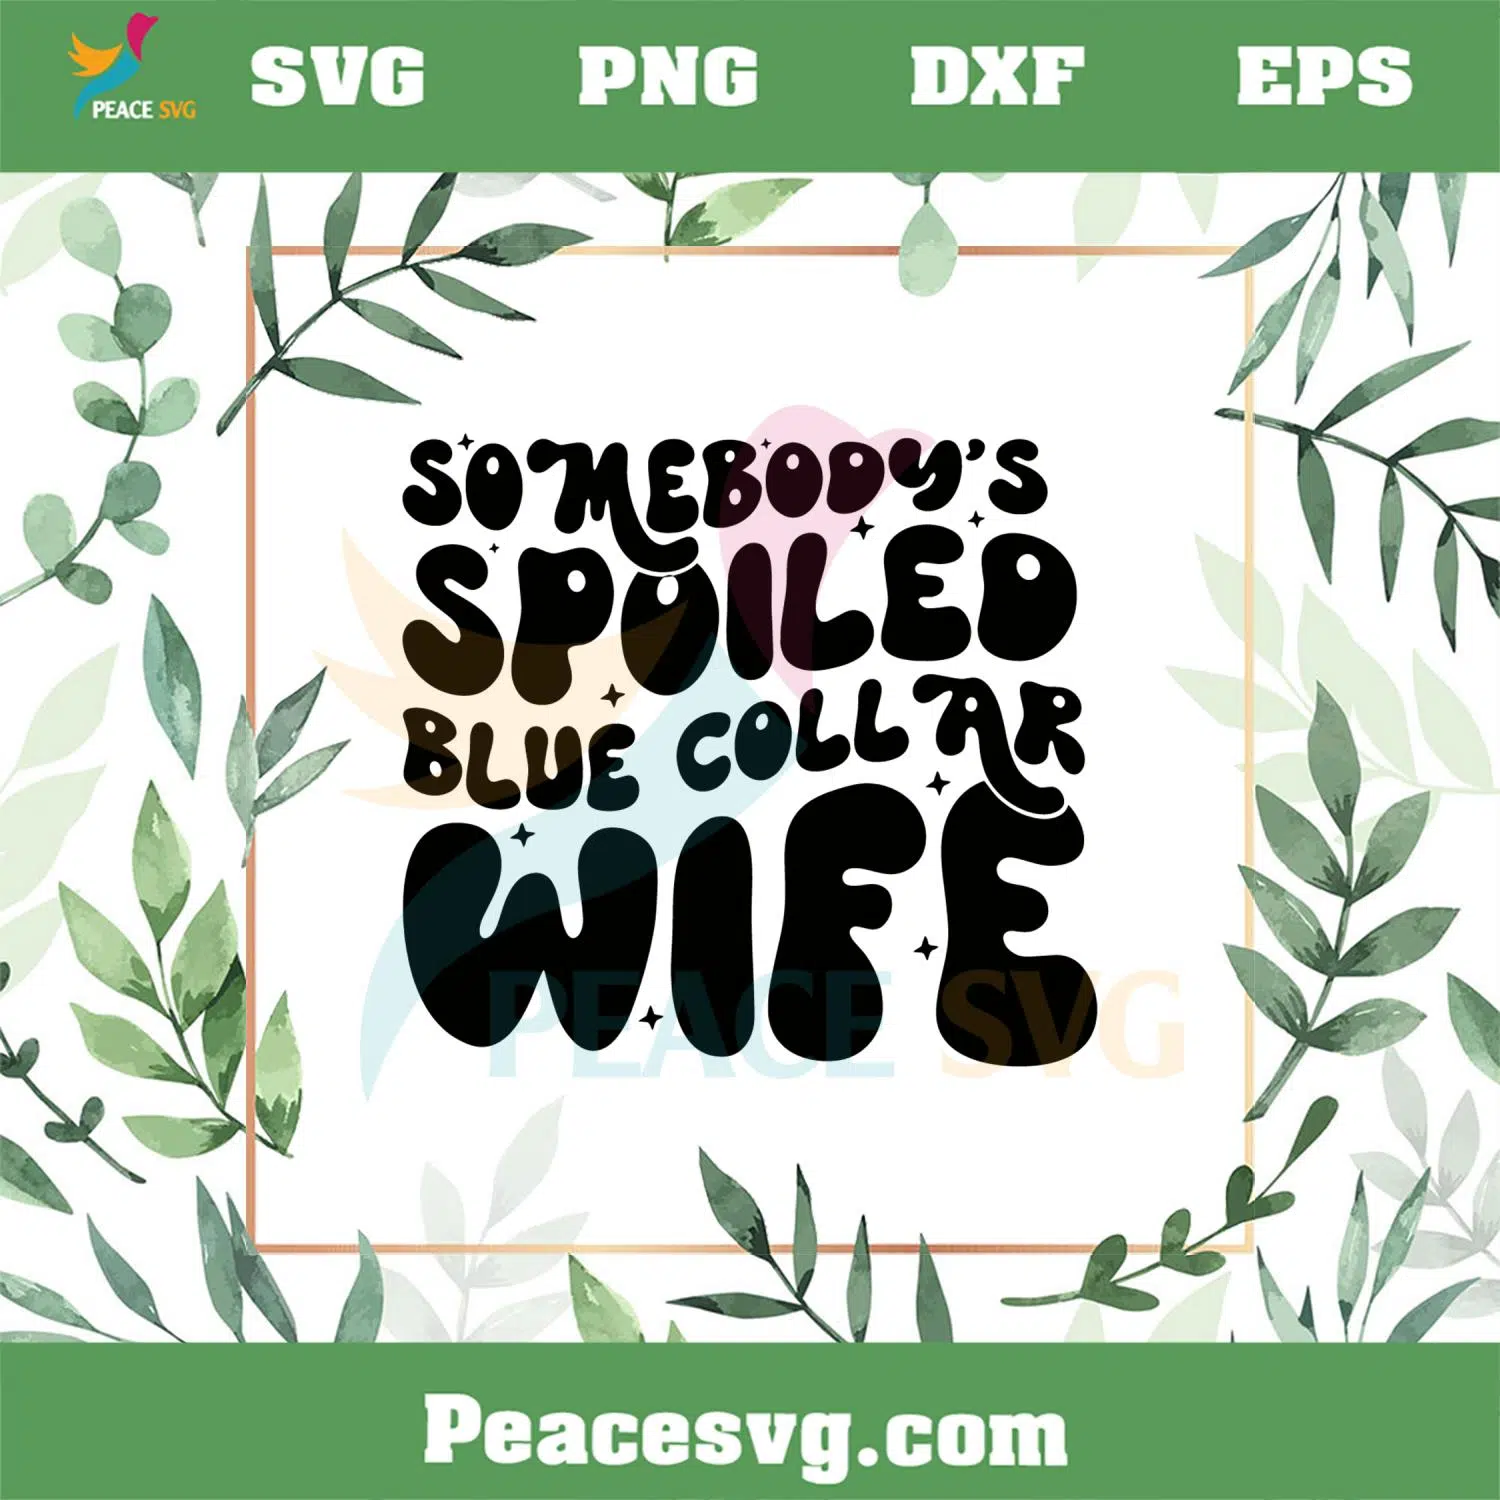 Somebody’s Spoiled Blue Collar Wife Funny Mom SVG Cutting Files